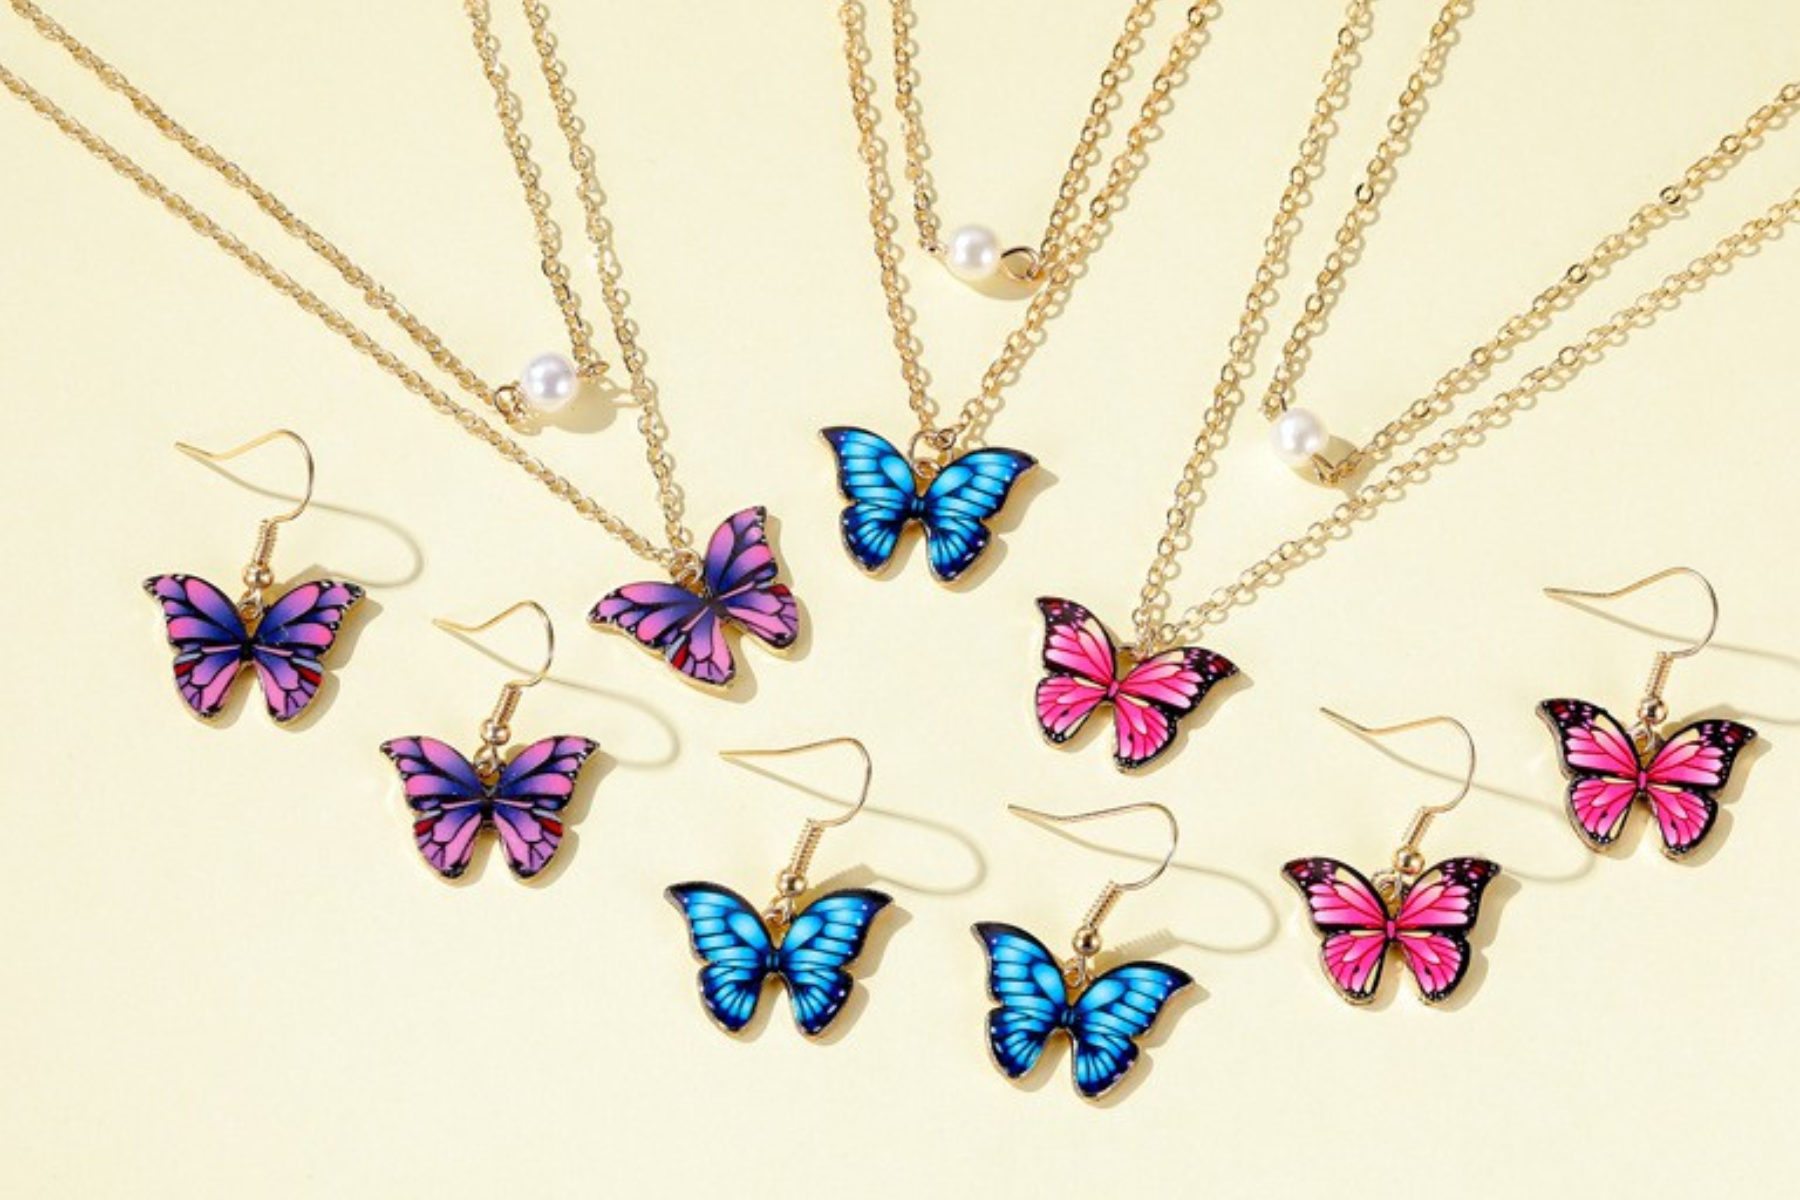 Six butterfly earrings are layered with three butterfly necklaces